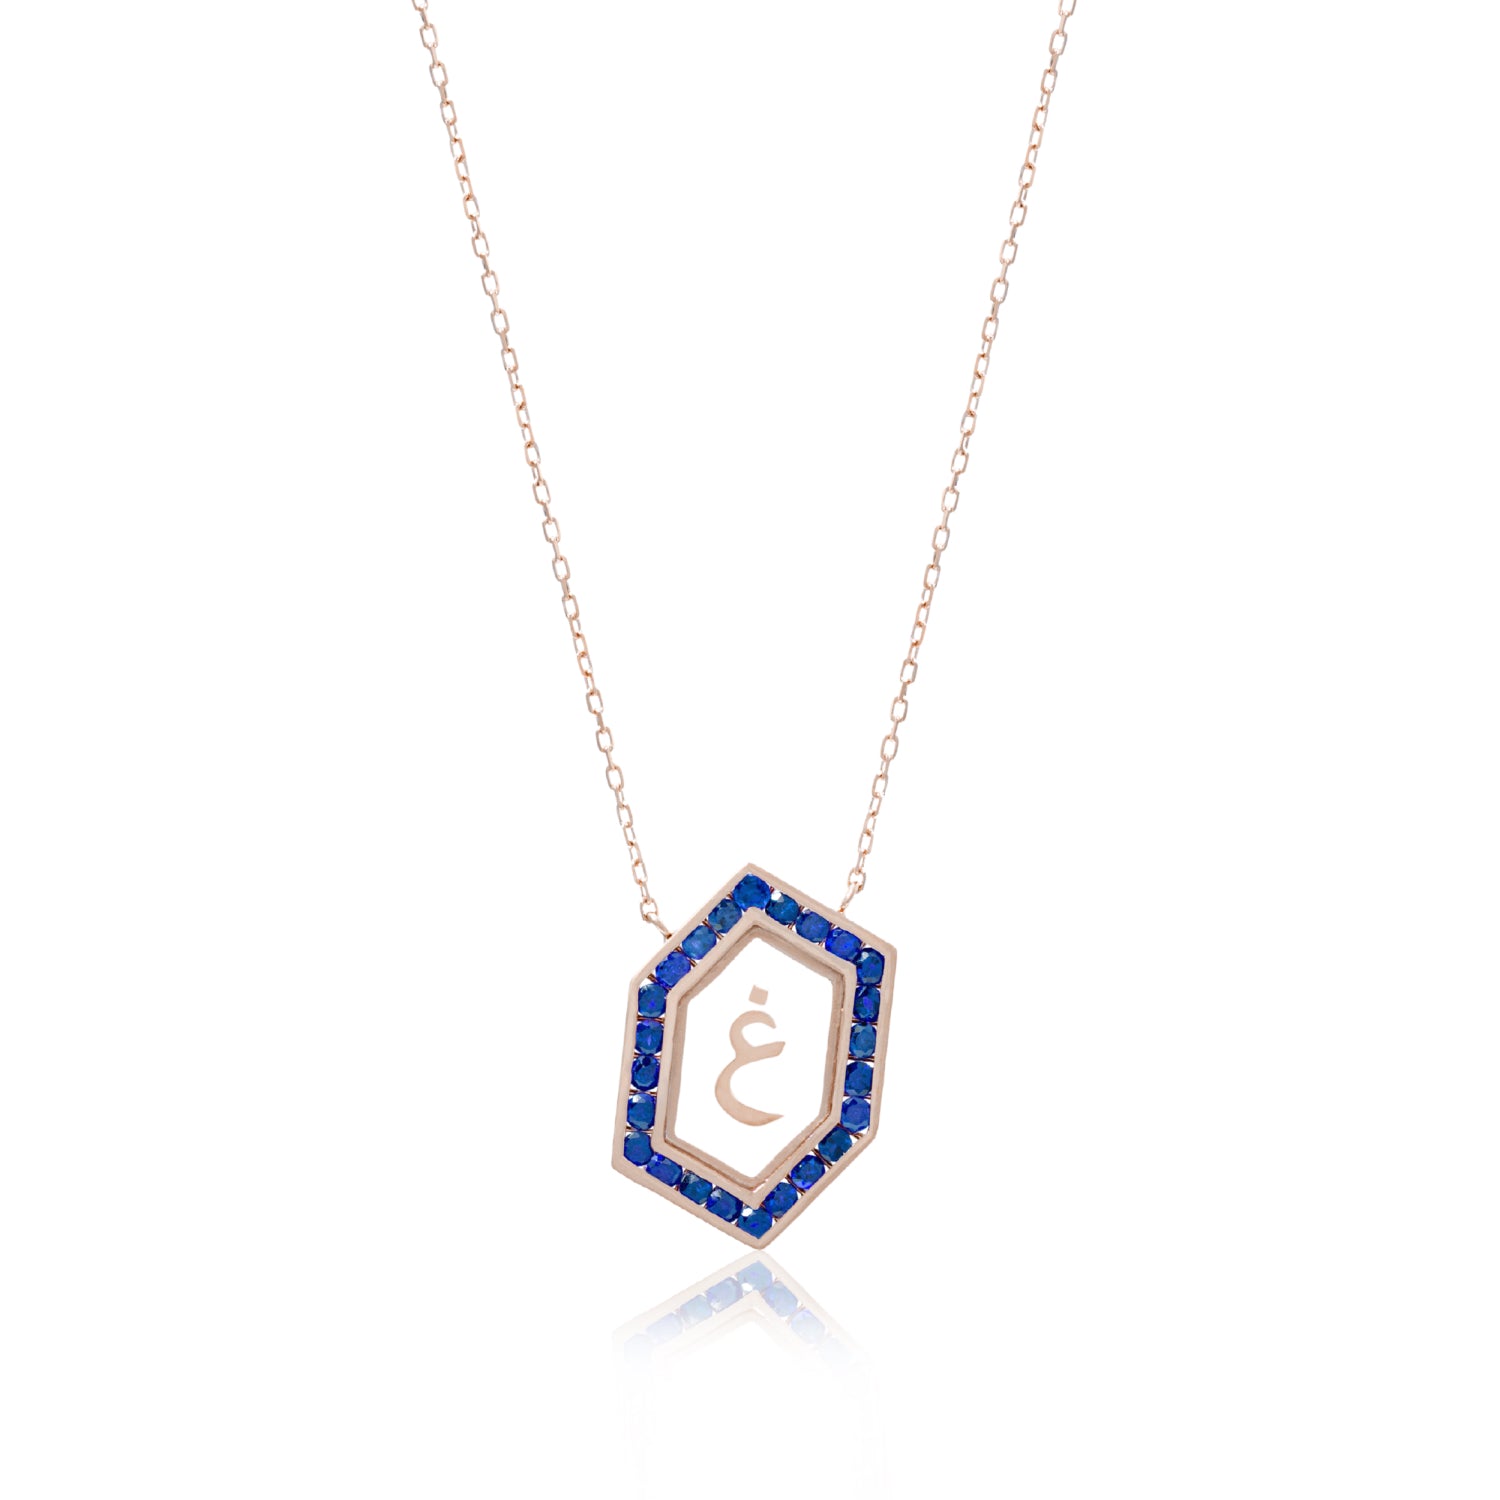 Qamoos 1.0 Letter غ Sapphire Necklace in Rose Gold